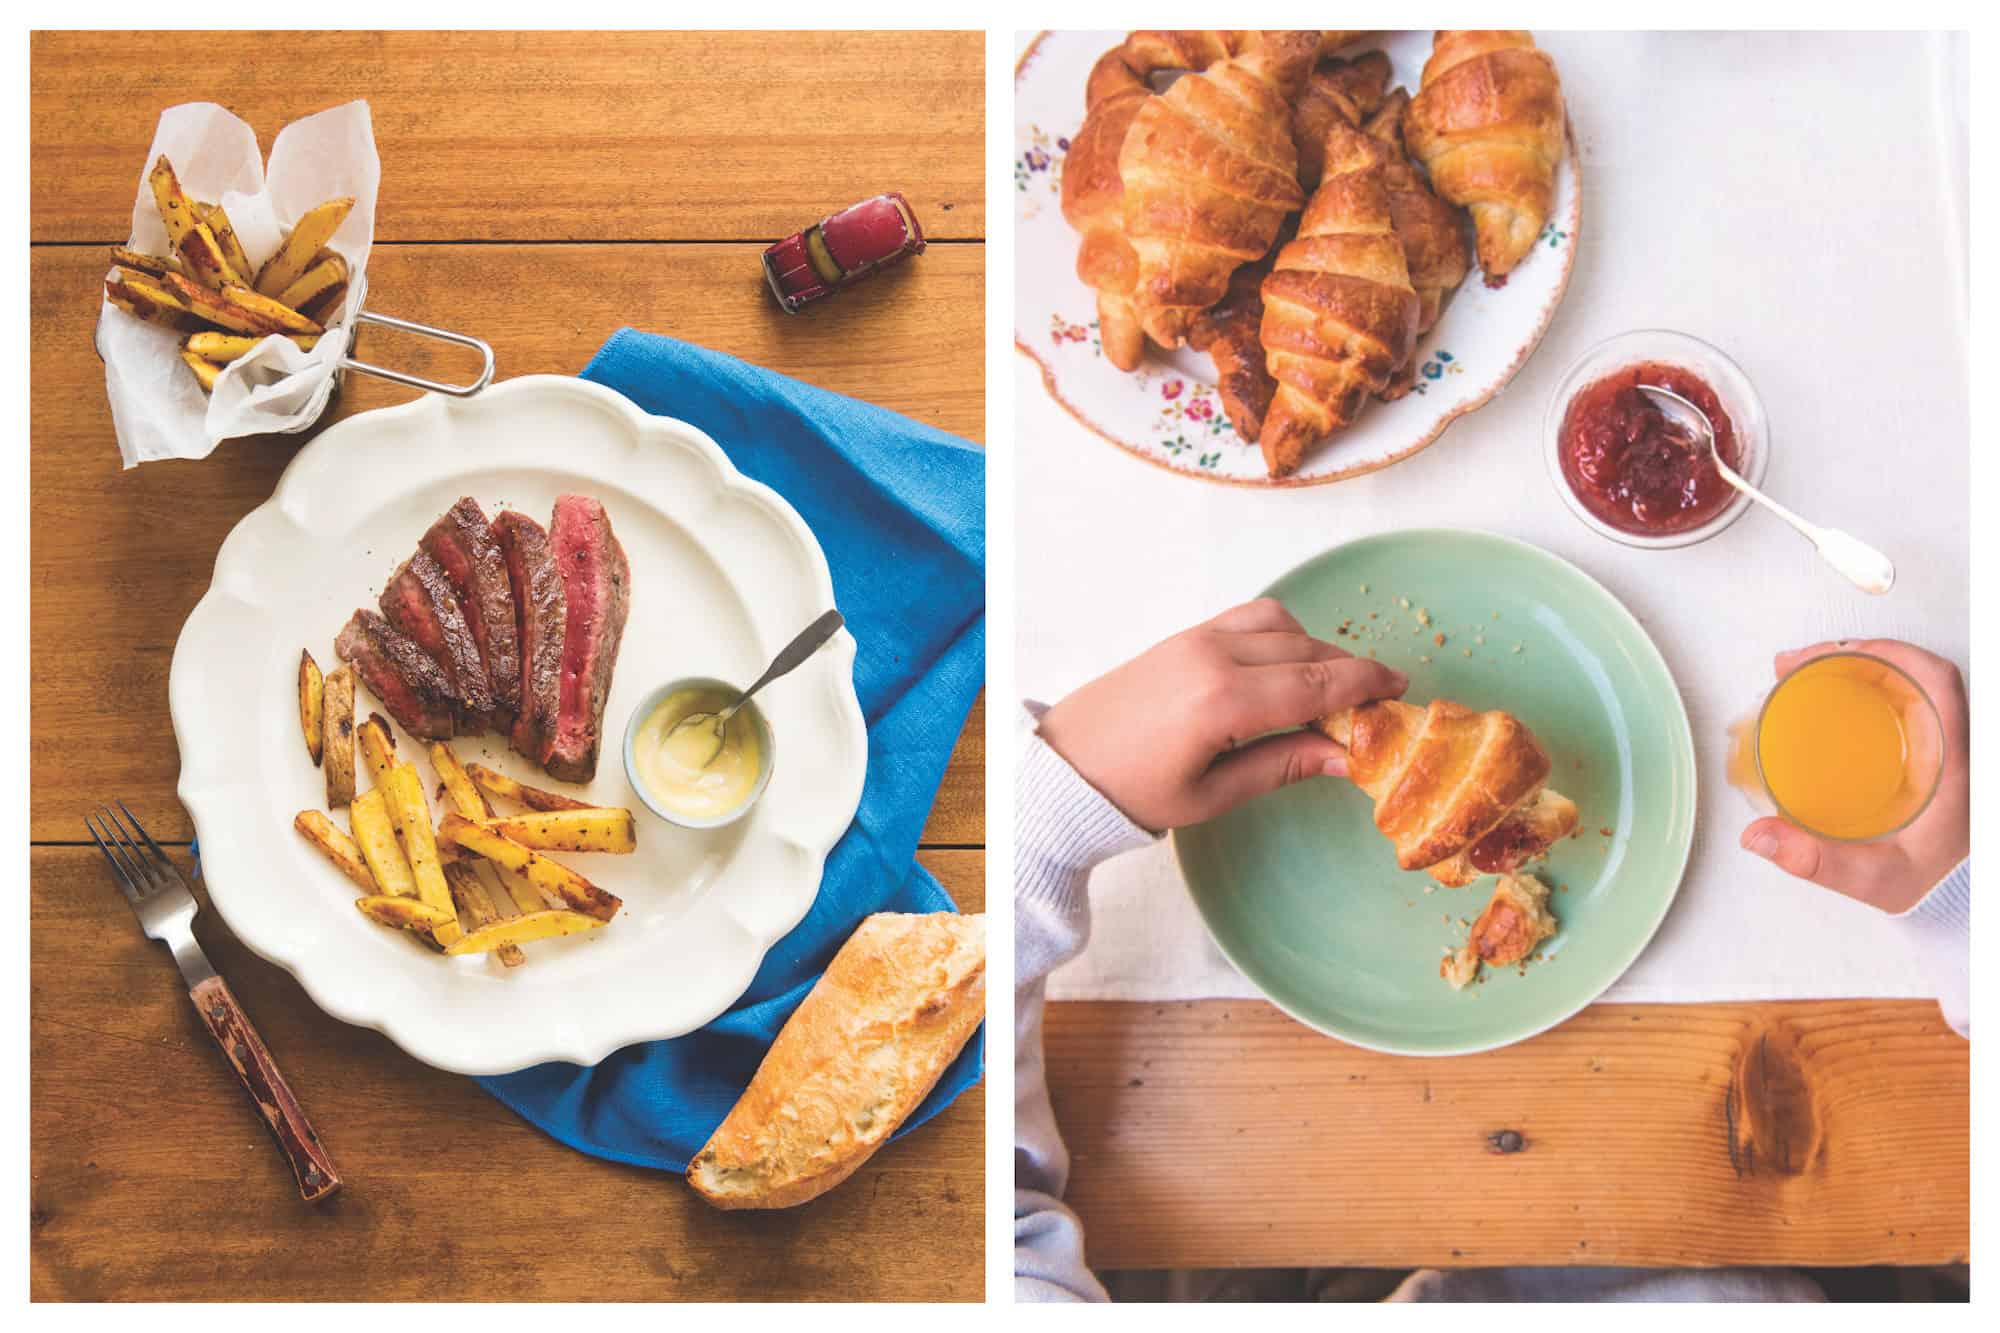 Perfectly cooked steak and frites French style in author Mardi Michels cookbook (left). Butter croissants, homemade jams and freshly-pressed orange juice (right).